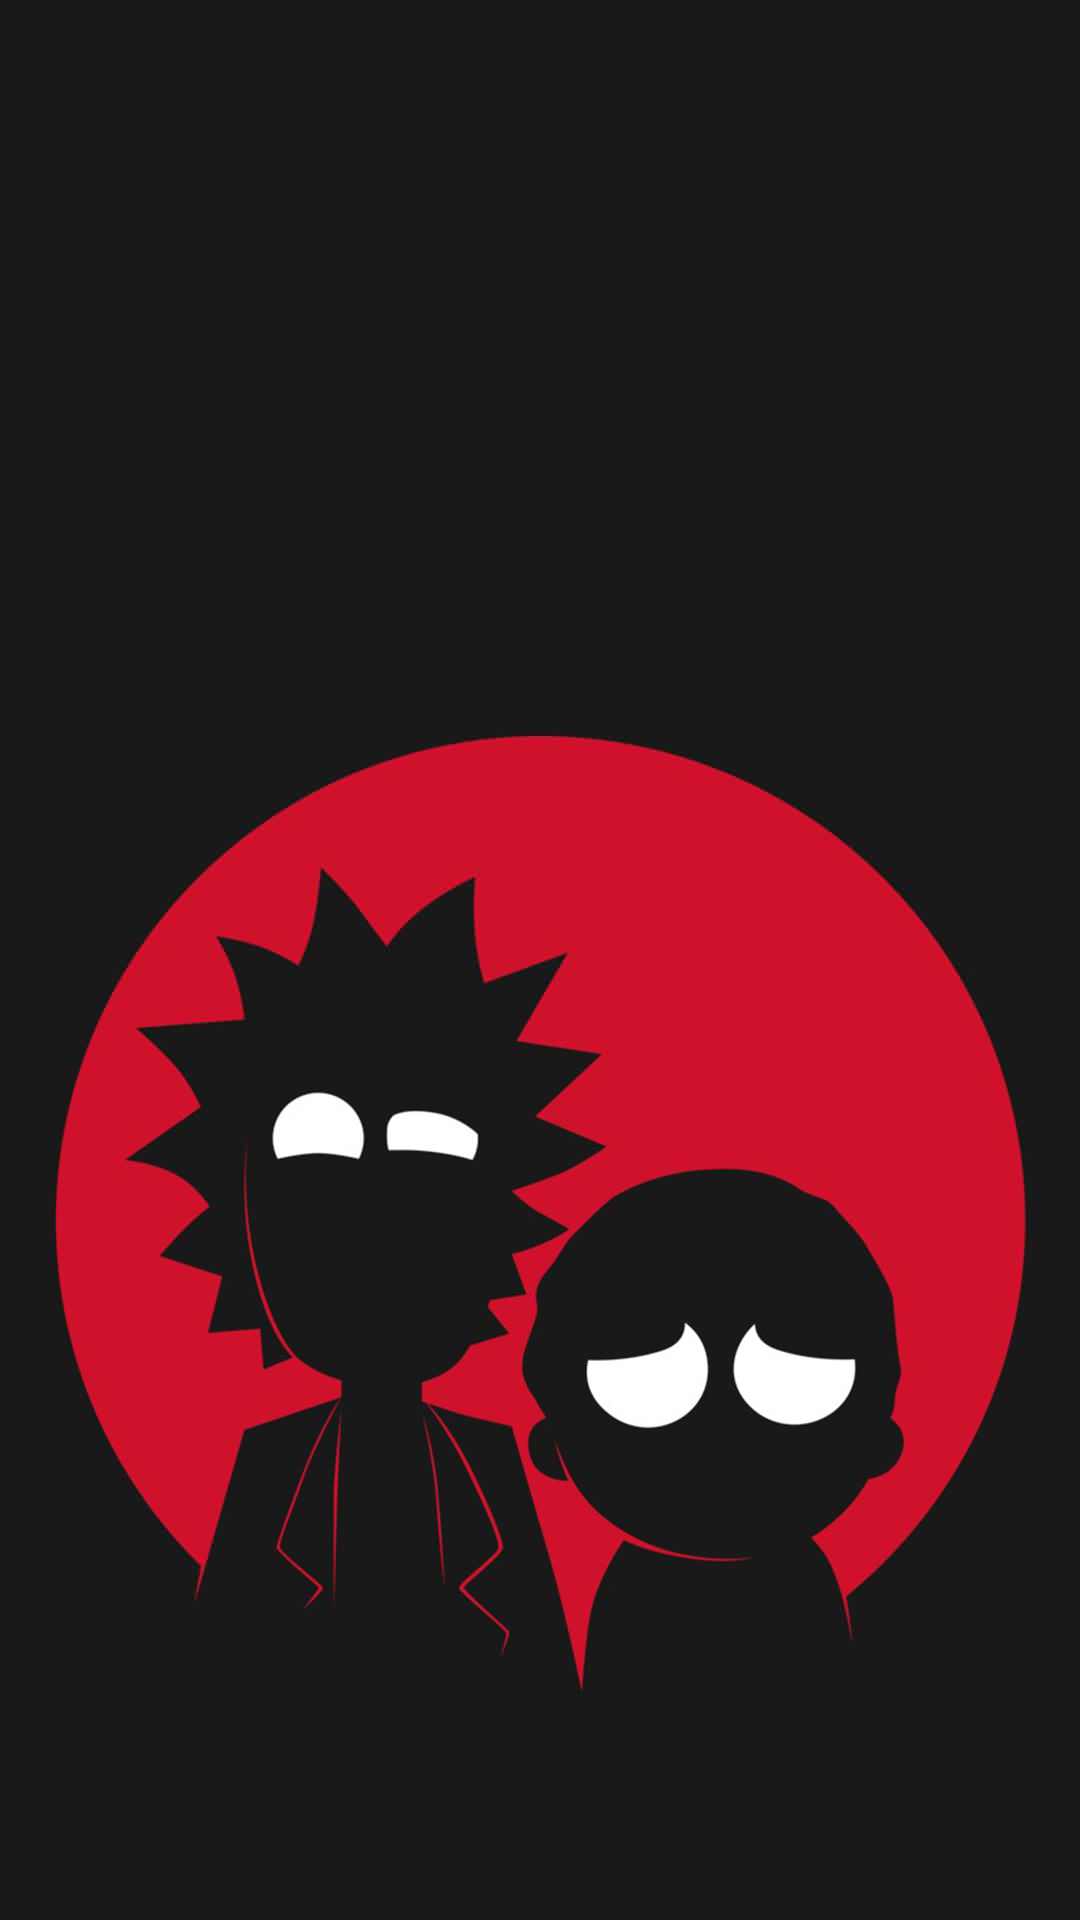 Rick and Morty iPhone Wallpapers - Top Free Rick and Morty iPhone